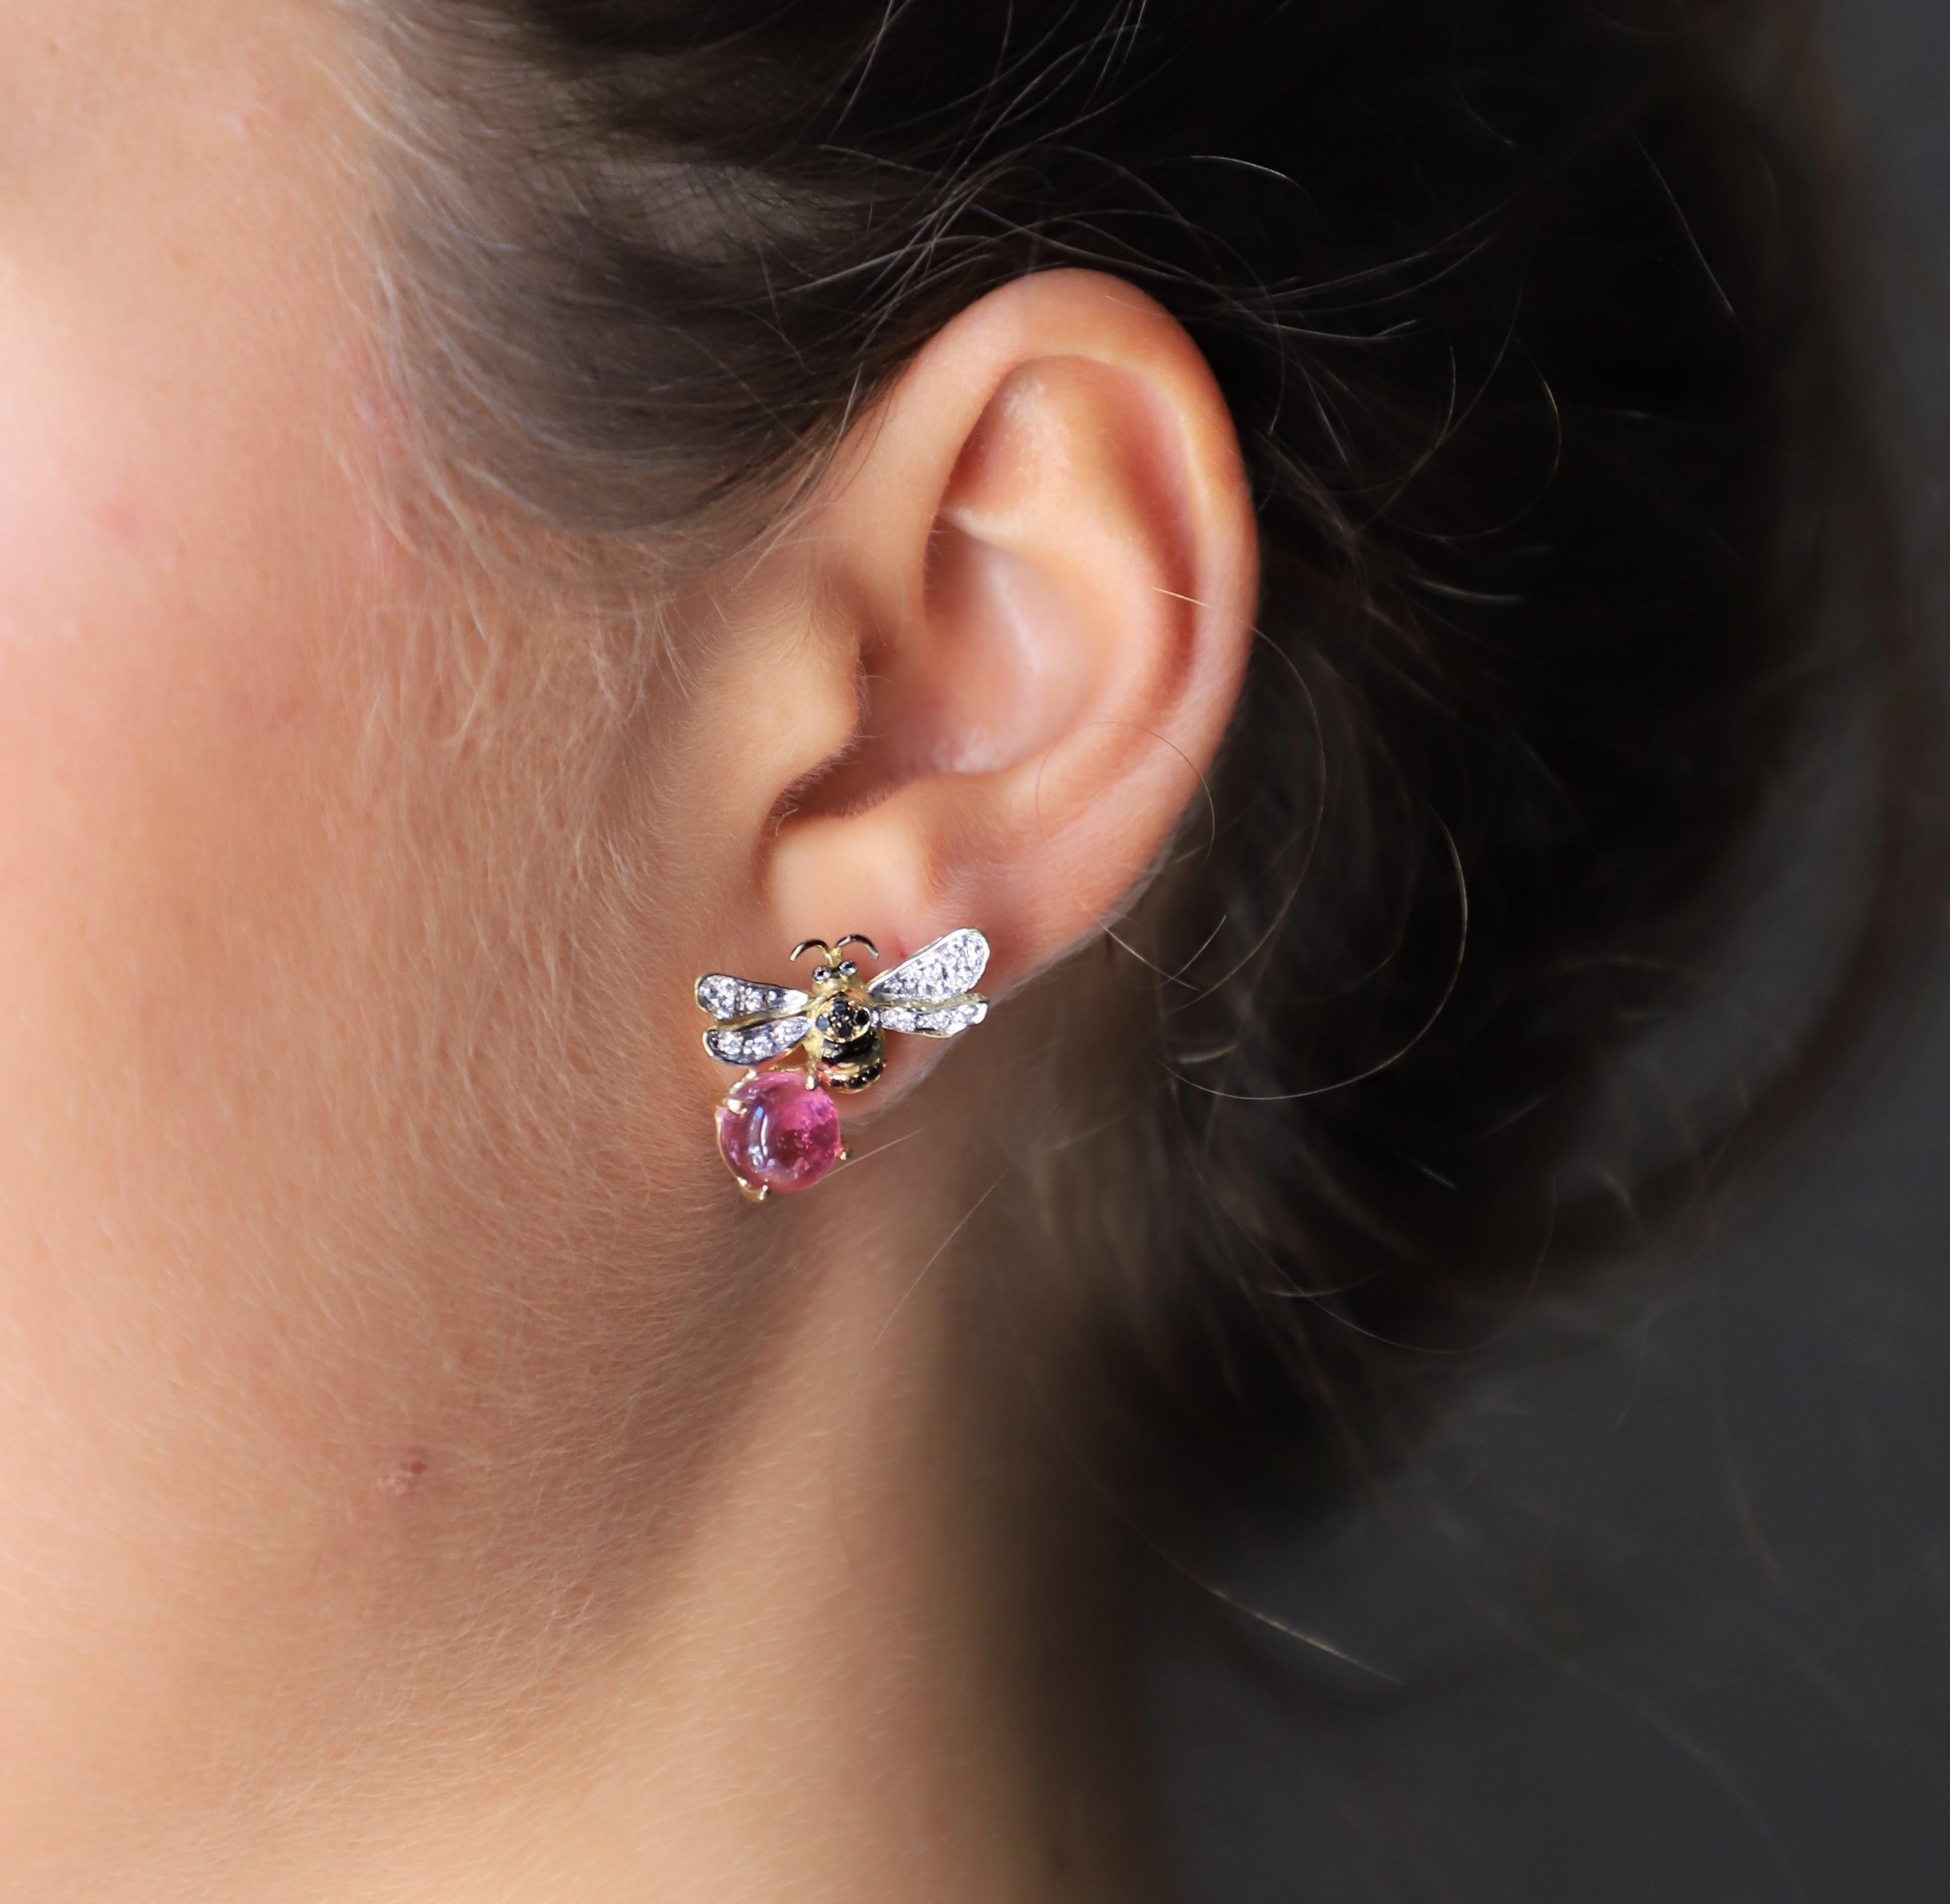 Rossella Ugolini Design Collection, a pair of Bees Stud Earrings handcrafted in 18 Karats Yellow Gold and adorned with a beautiful deep 5.5 Karat pink and green tourmaline stone, 0.16 Karat White Diamond 0.18 Karat Black Diamonds Bees Handcrafted